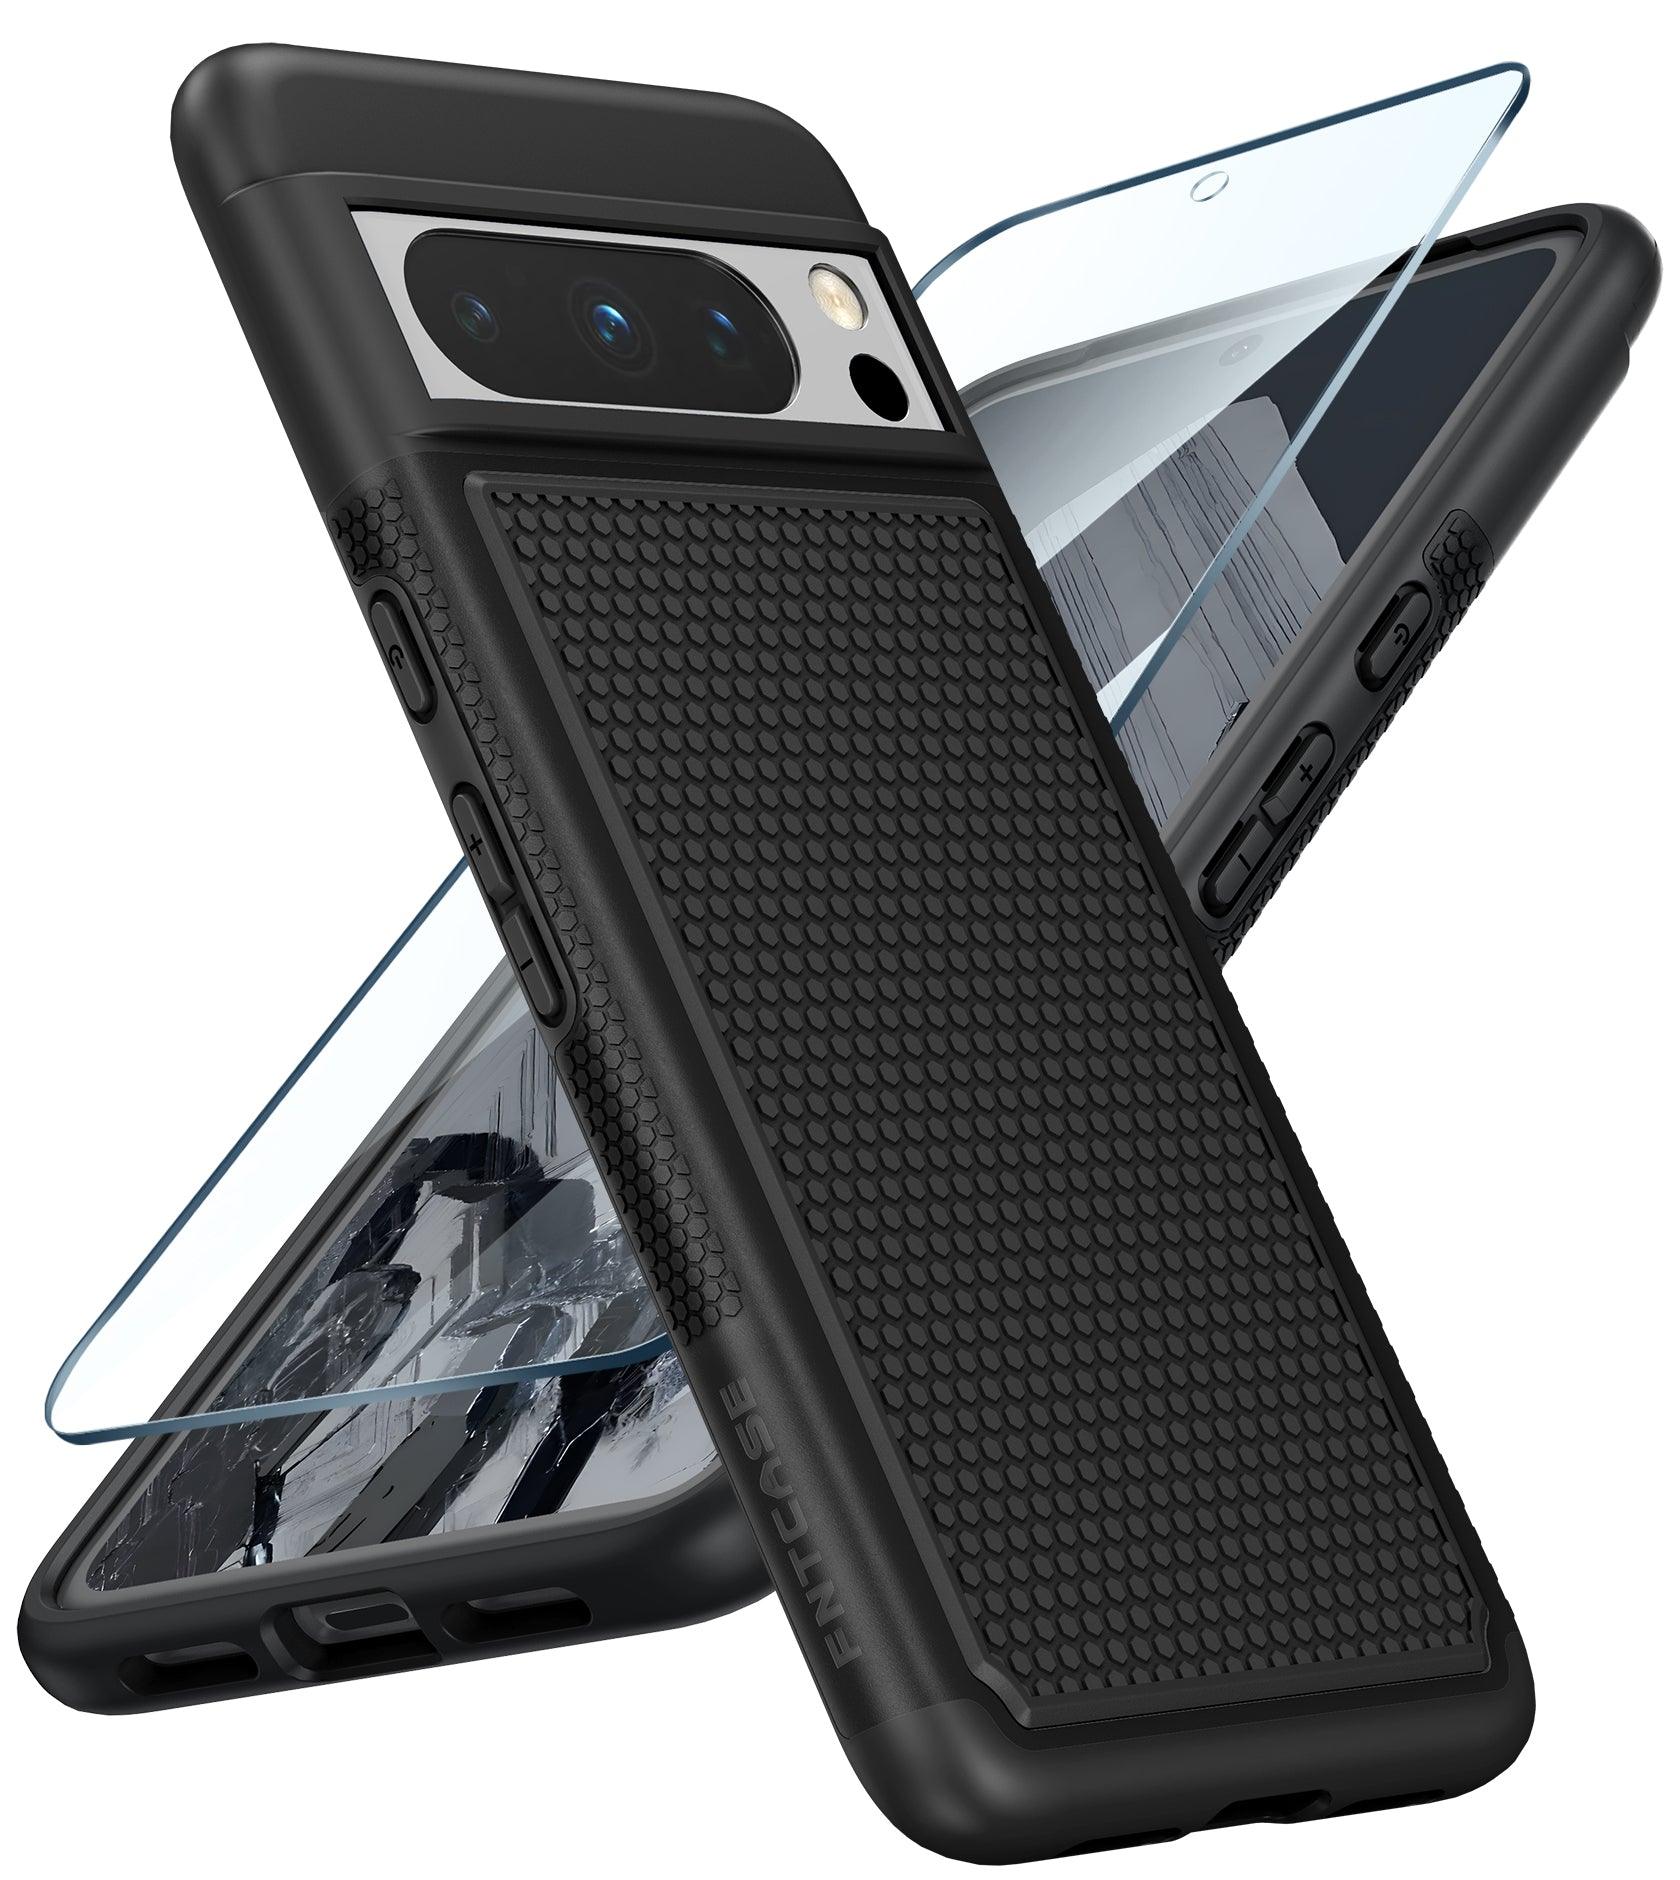 Pixel 8 Pro Case Shock Protective with Anti-Slip Textured Back